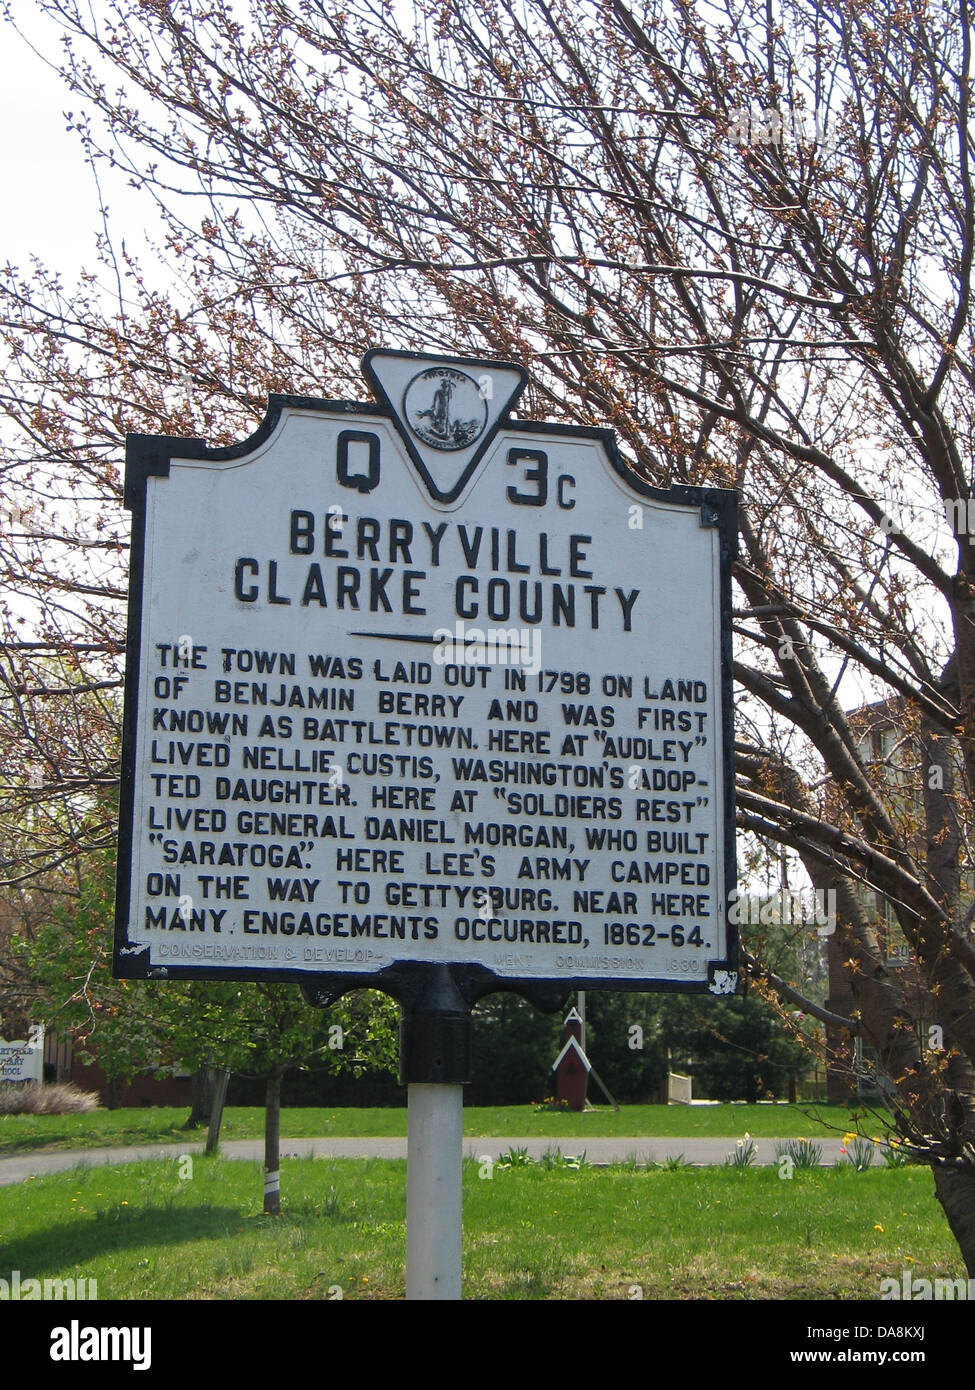 BERRYVILLE CLARKE COUNTY The town was laid out in 1798 on land of Benjamin Berry and was first known as Battletown. Here at 'Audley' lived Nellie Custis, Washington's adopted daughter. Here at 'Soldiers Rest' lived General Daniel Morgan, who built 'Saratoga.' Here Lee's army camped on the way to Gettysburg. Near here many engagements occurred, 1862-64. Conservation & Development Commission, 1930. Stock Photo